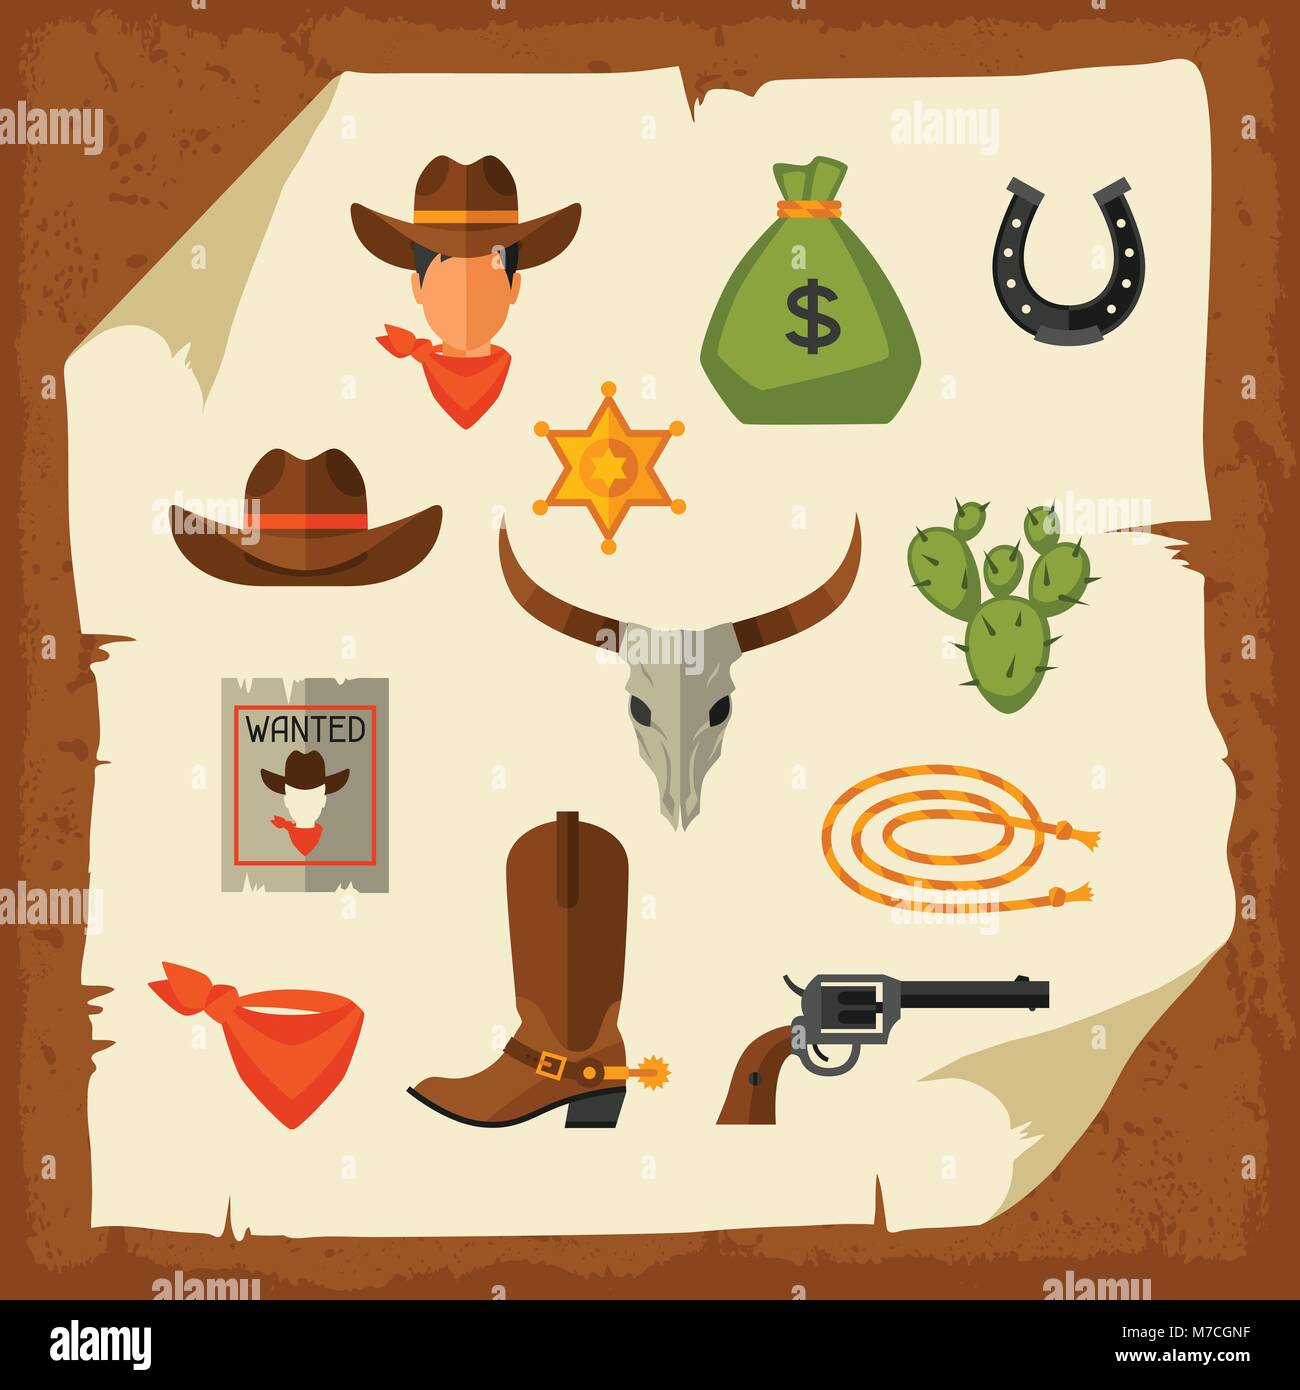 Wild west cowboy objects and design elements Stock Vector